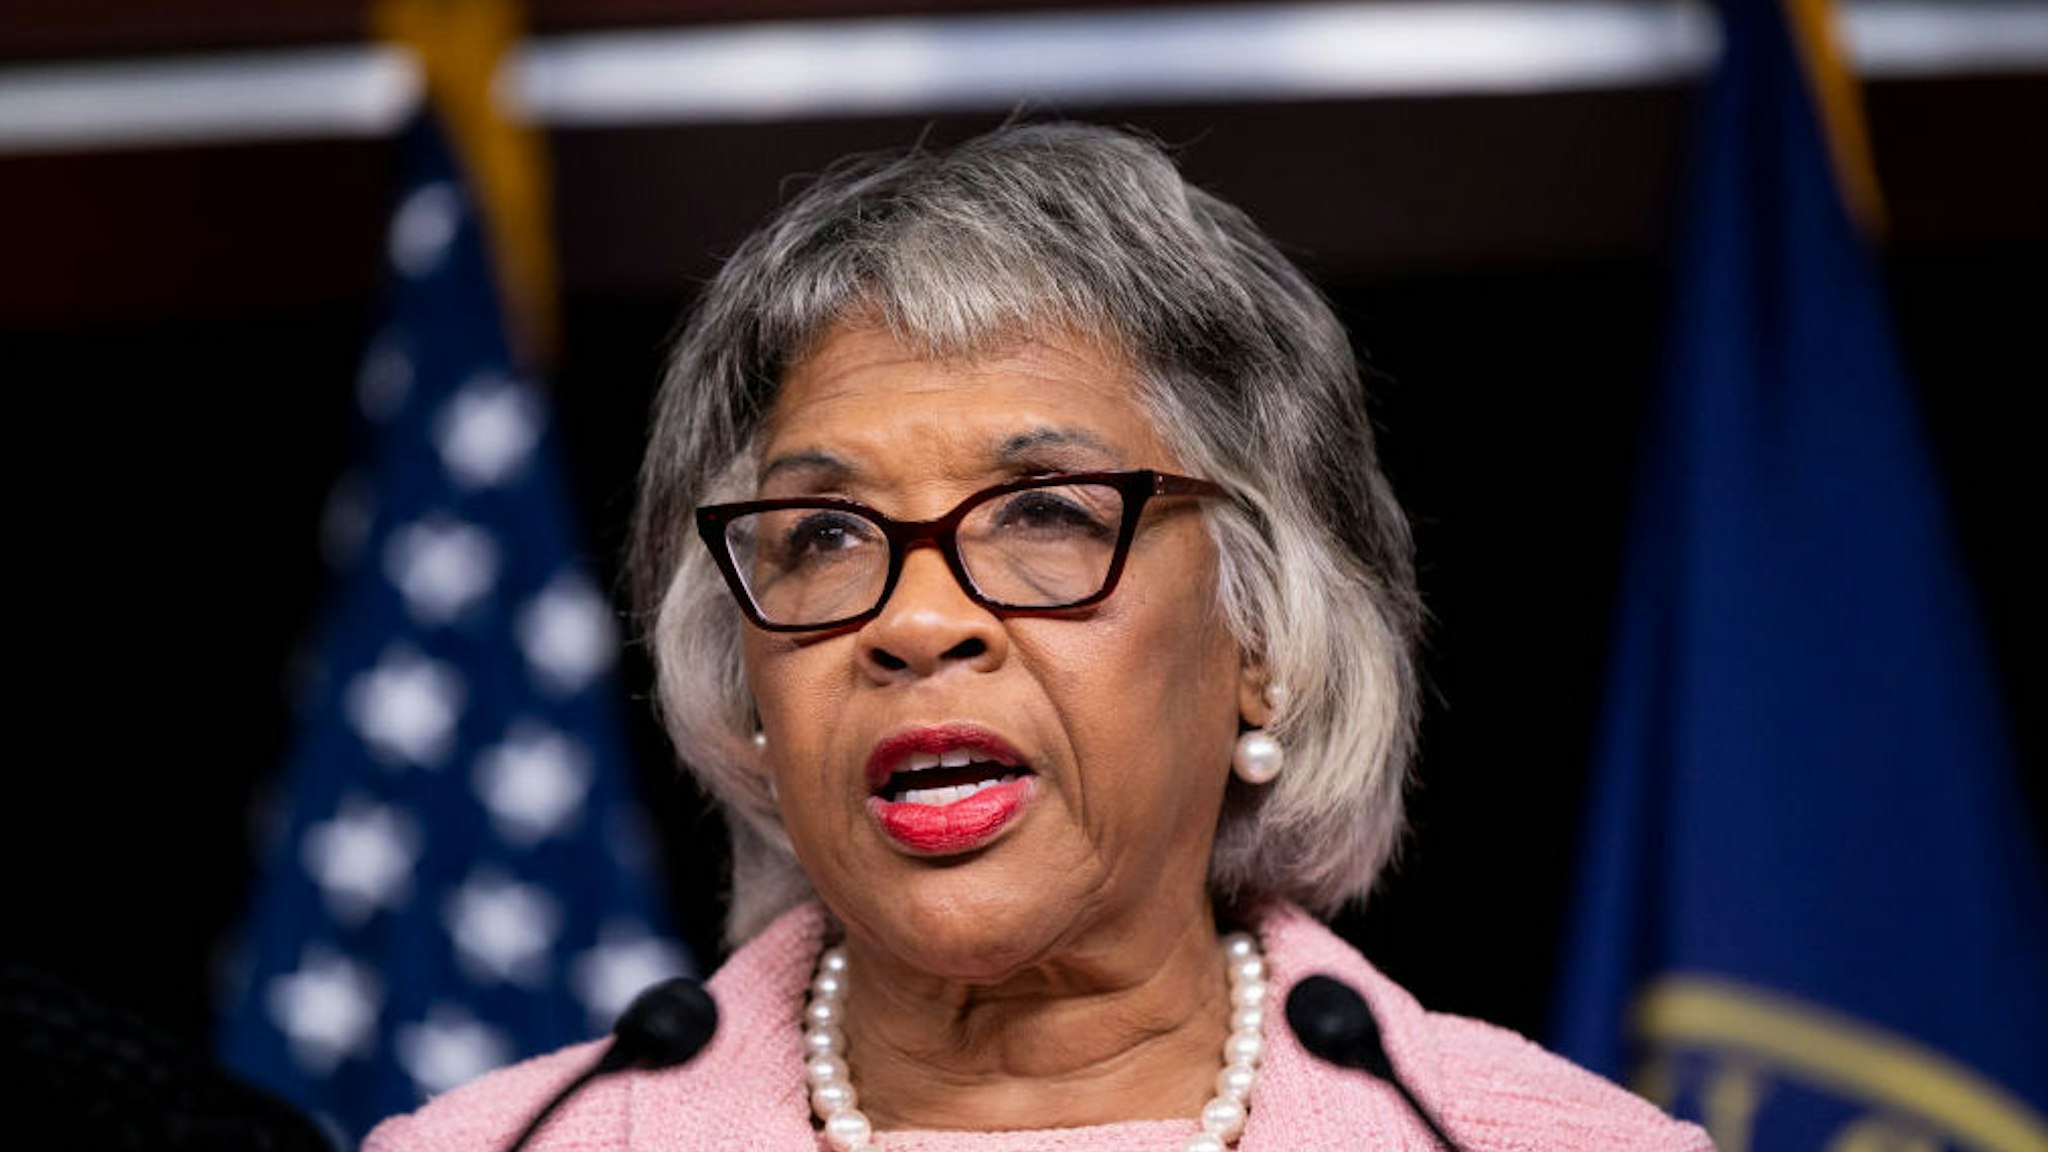 UNITED STATES - OCTOBER 27: Rep. Joyce Beatty, D-Ohio, speaks during the Congressional Black Caucus news conference in the Capitol on Black priorities in the infrastructure bill and the Build Back Better agenda on Wednesday, Oct. 27, 2021.